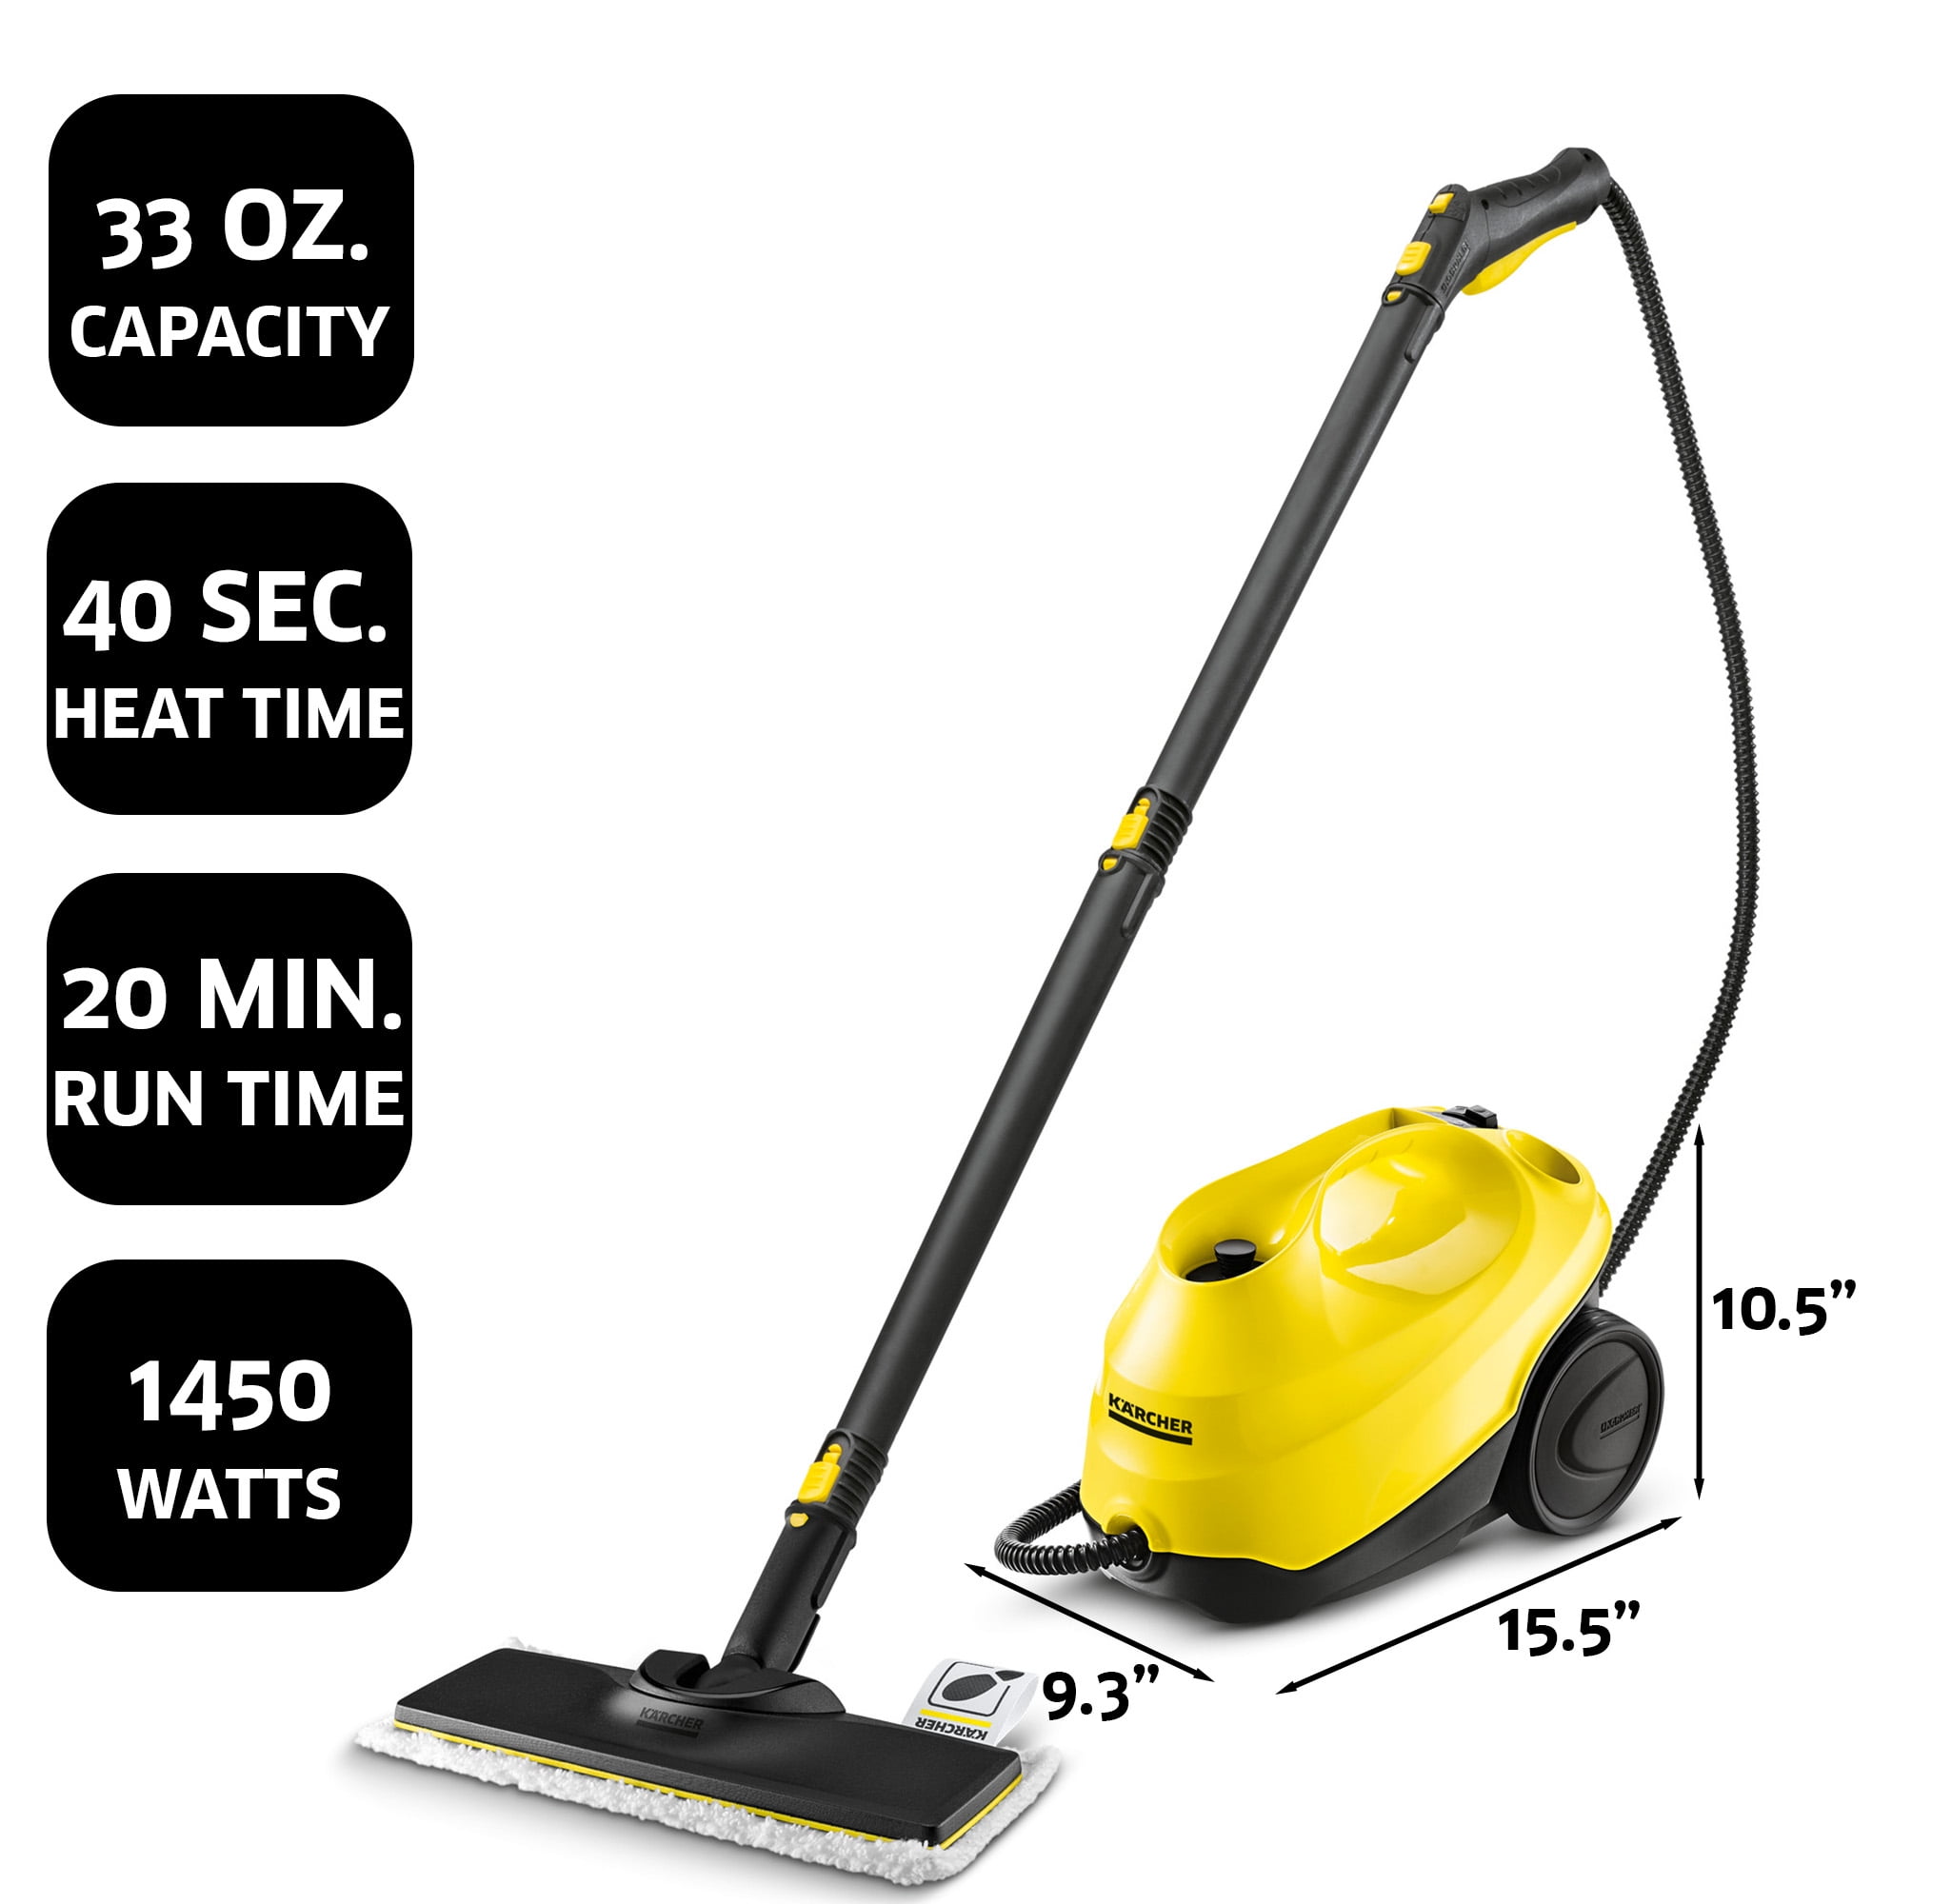  Kärcher - SC 3 Portable Multi-Surface Steam Cleaner/Steam Mop  with Attachments – Chemical-Free, Rapid 40 Second Heat-Up, Continuous Steam  - For Grout, Tile, Hard Floors, Appliances & More